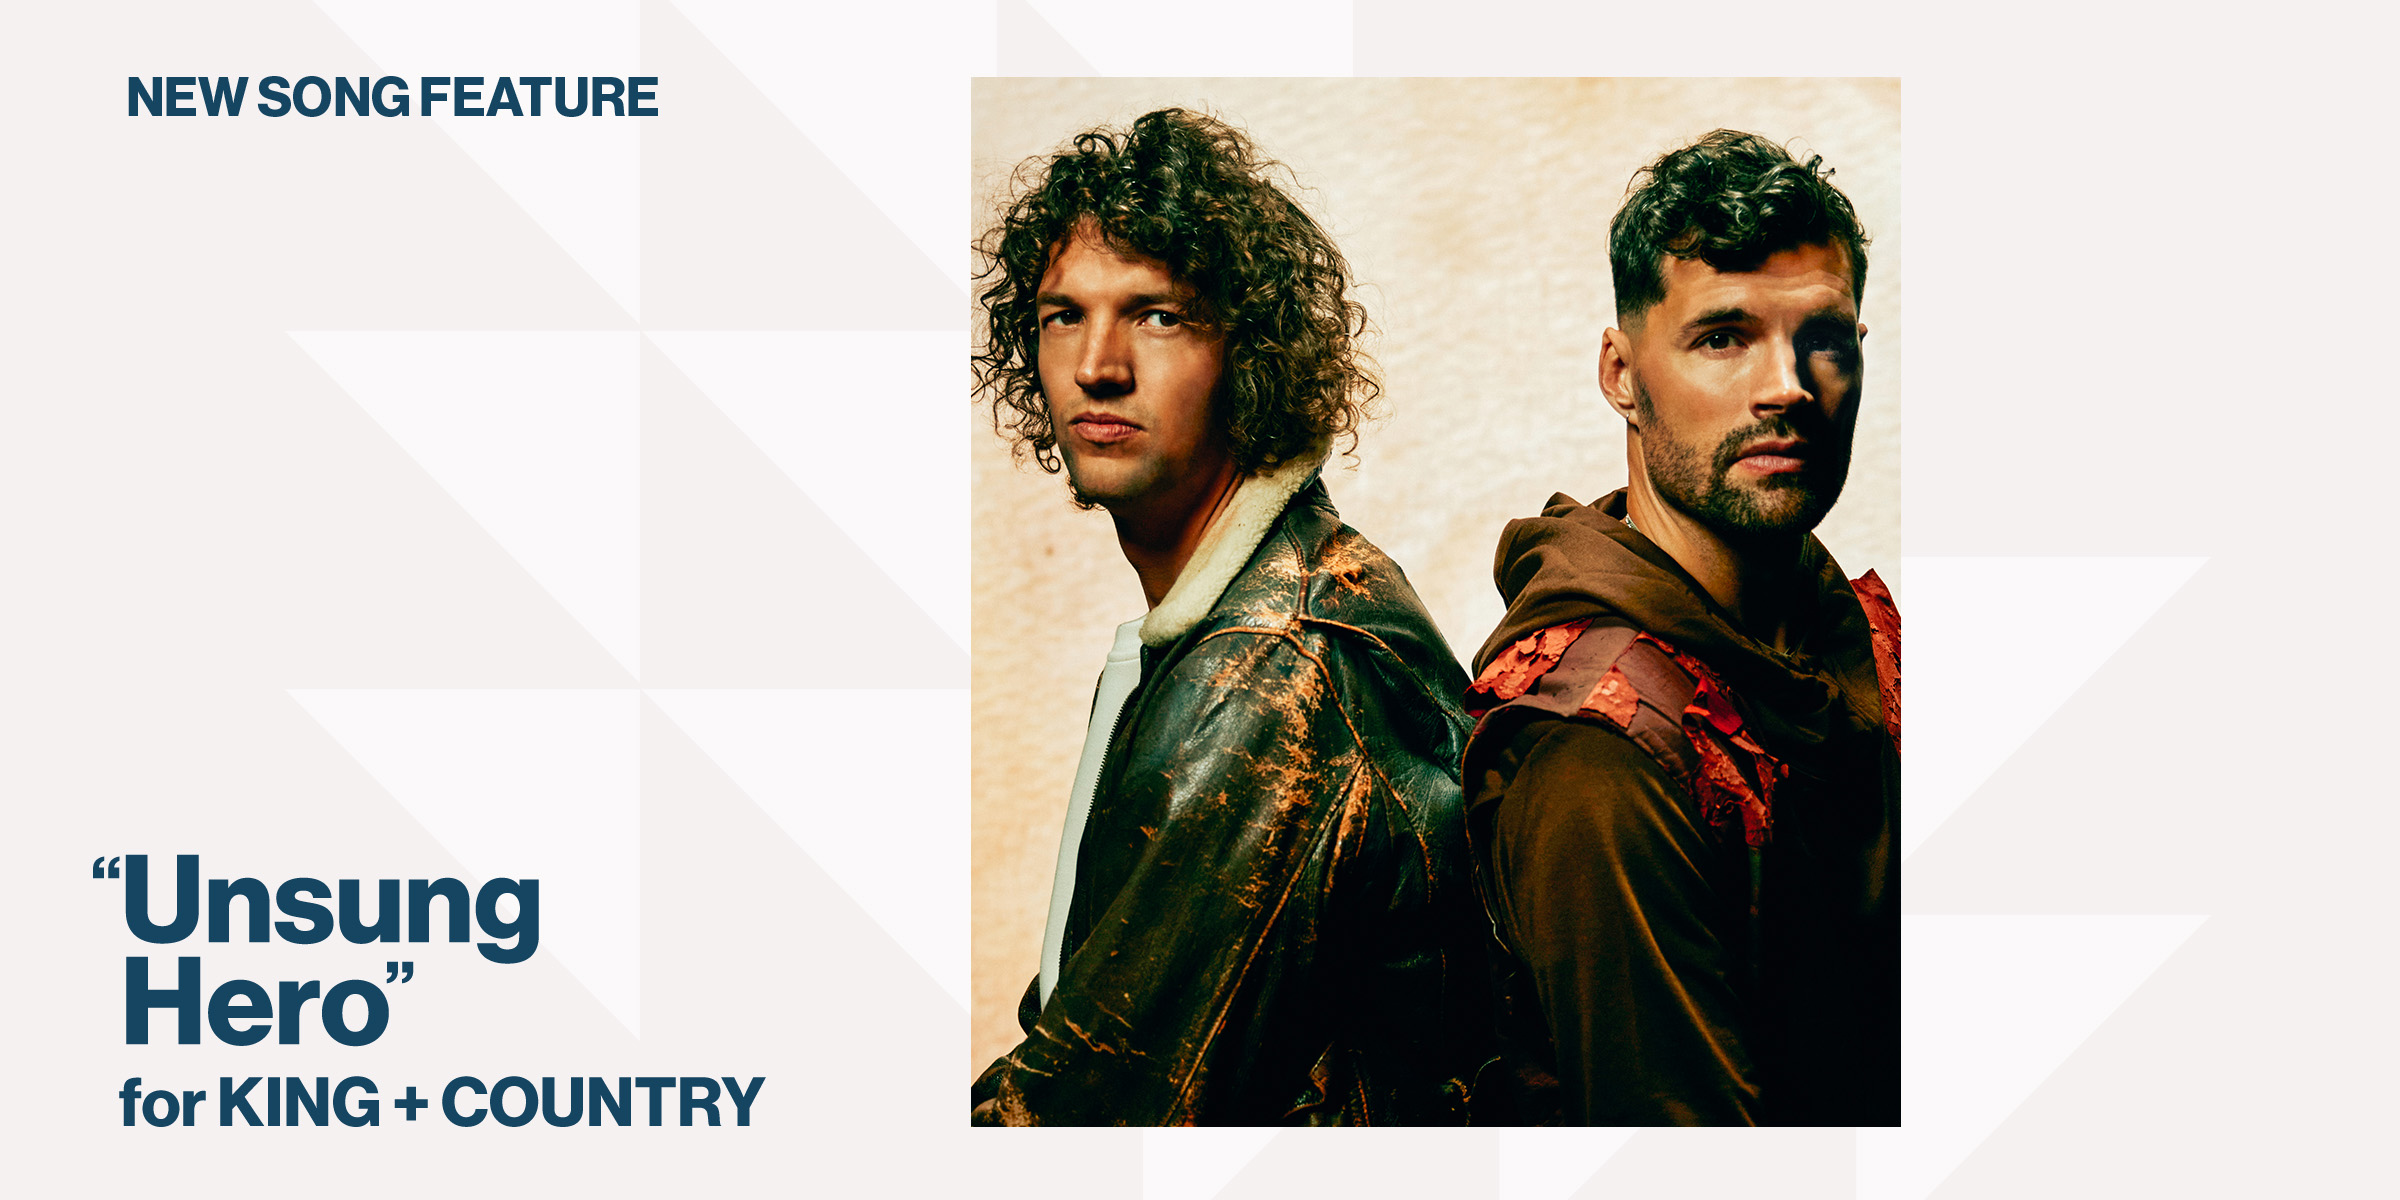 New Song Feature: "Unsung Hero" for KING + COUNTRY